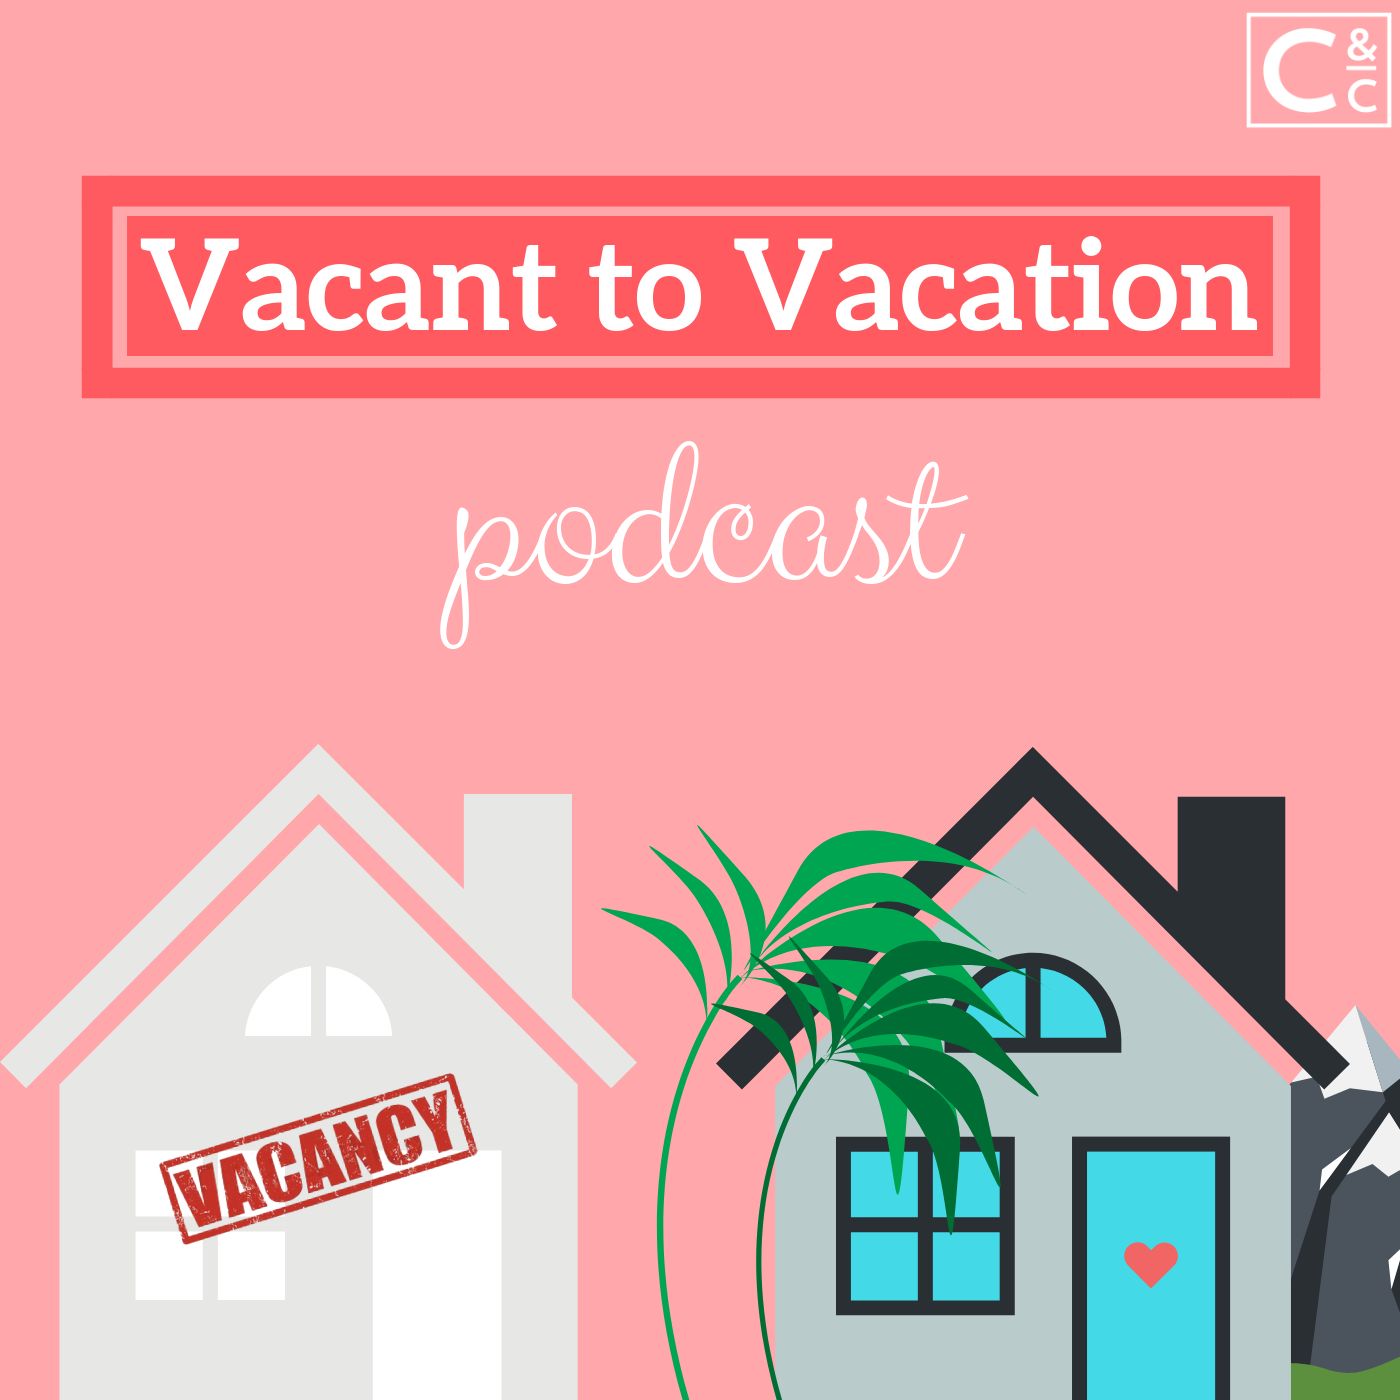 Illegal Short-Term Rental Scheme | Vacant to Vacation Podcast Ep. 2